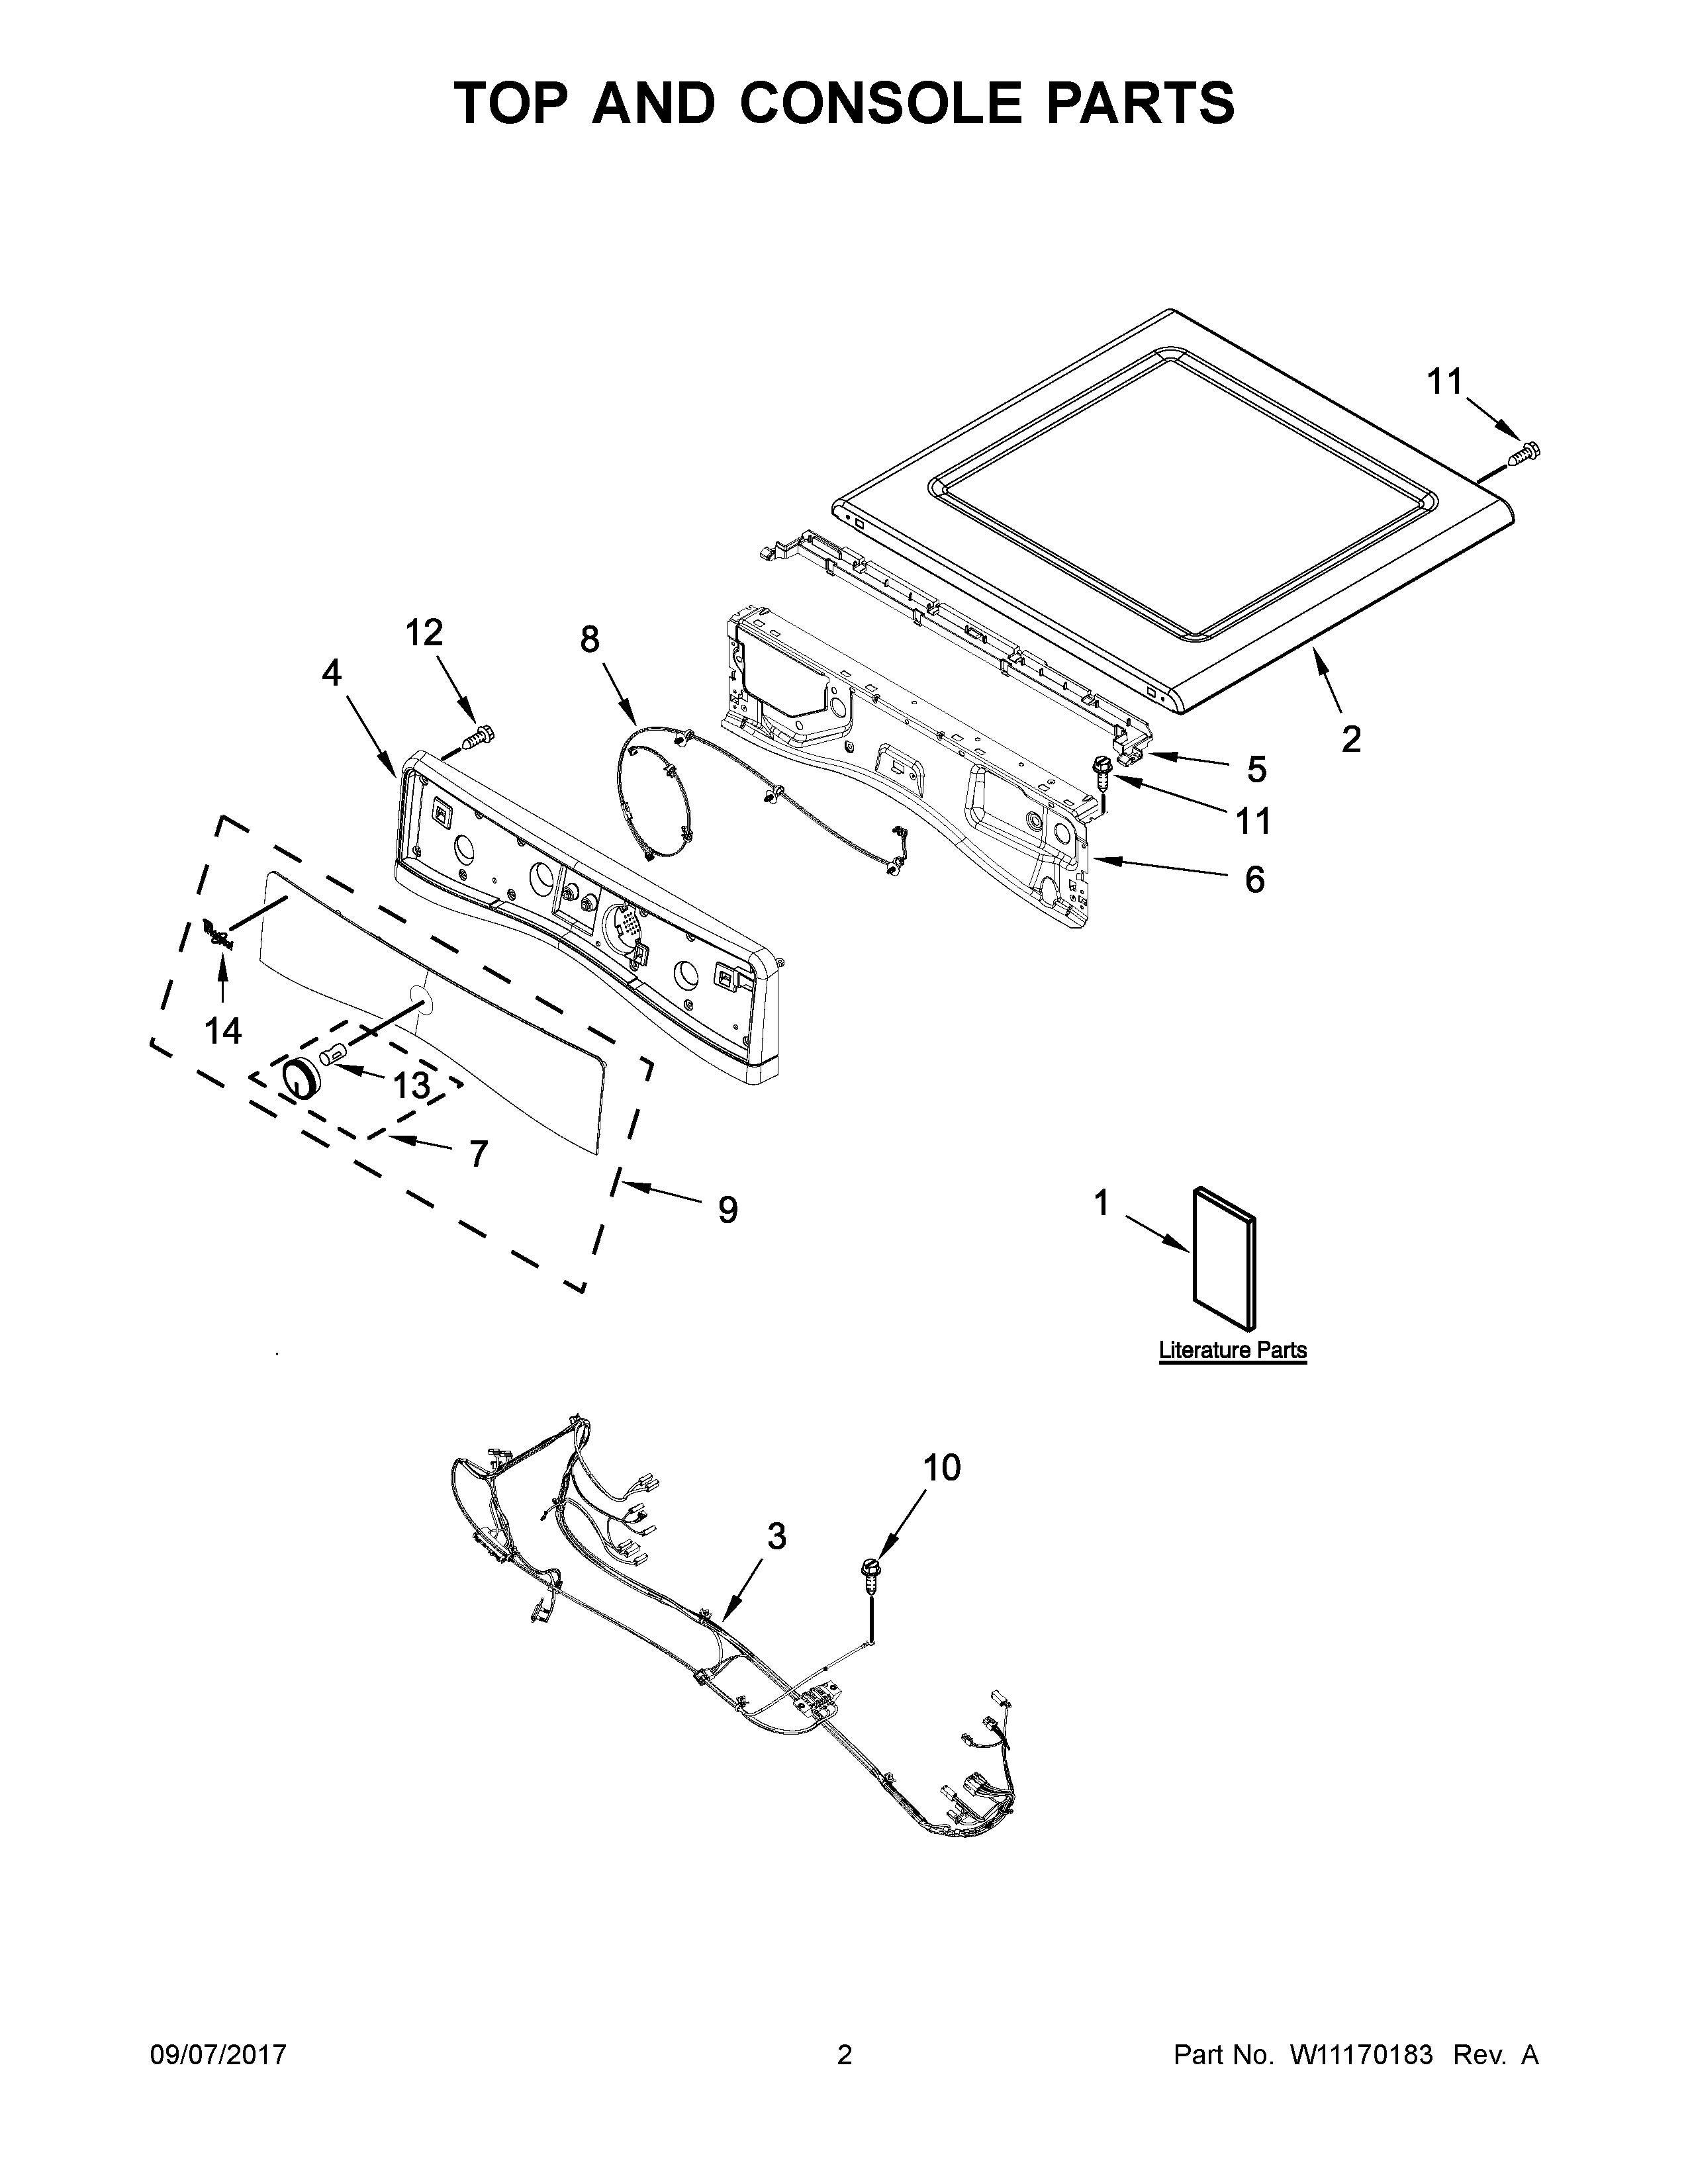 02 - TOP AND CABINET PARTS